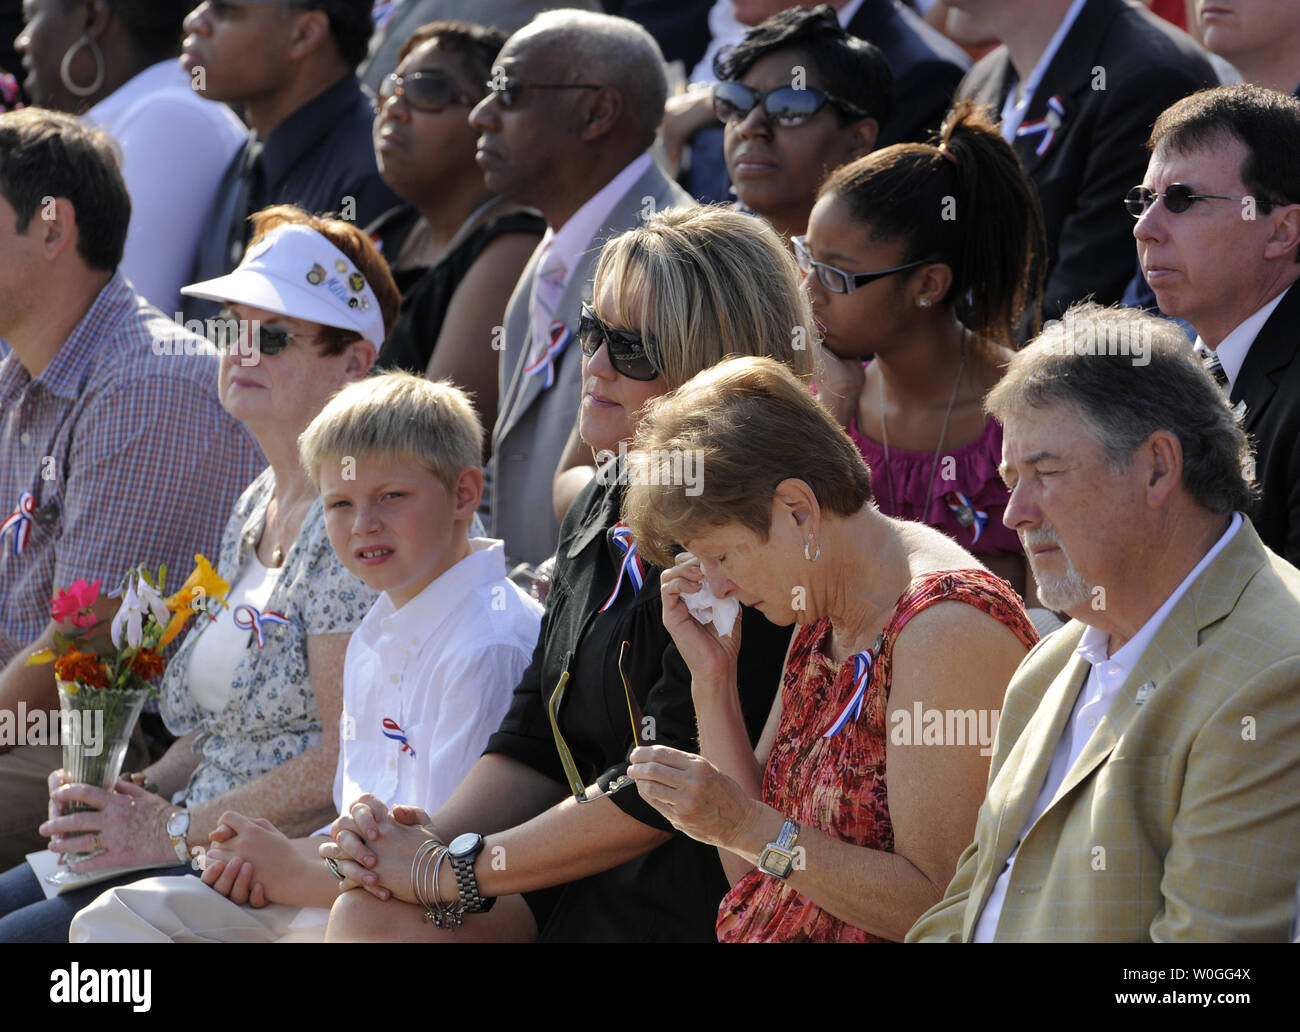 Patricia Falllon (C) of Fredericksburg, Virginia, who lost her daughter, Navy SK3 Jamie Fallon during the Pentagon attack, wipes tears during the 10th anniversary ceremony, September 11, 2011, in Arlington, Virginia.  On September 1, 2001, high-jacked American Airlines flight 77 crashed into the Pentagon, killing all 64 passengers on board and 125 in the Pentagon.   UPI/Mike Theiler Stock Photo